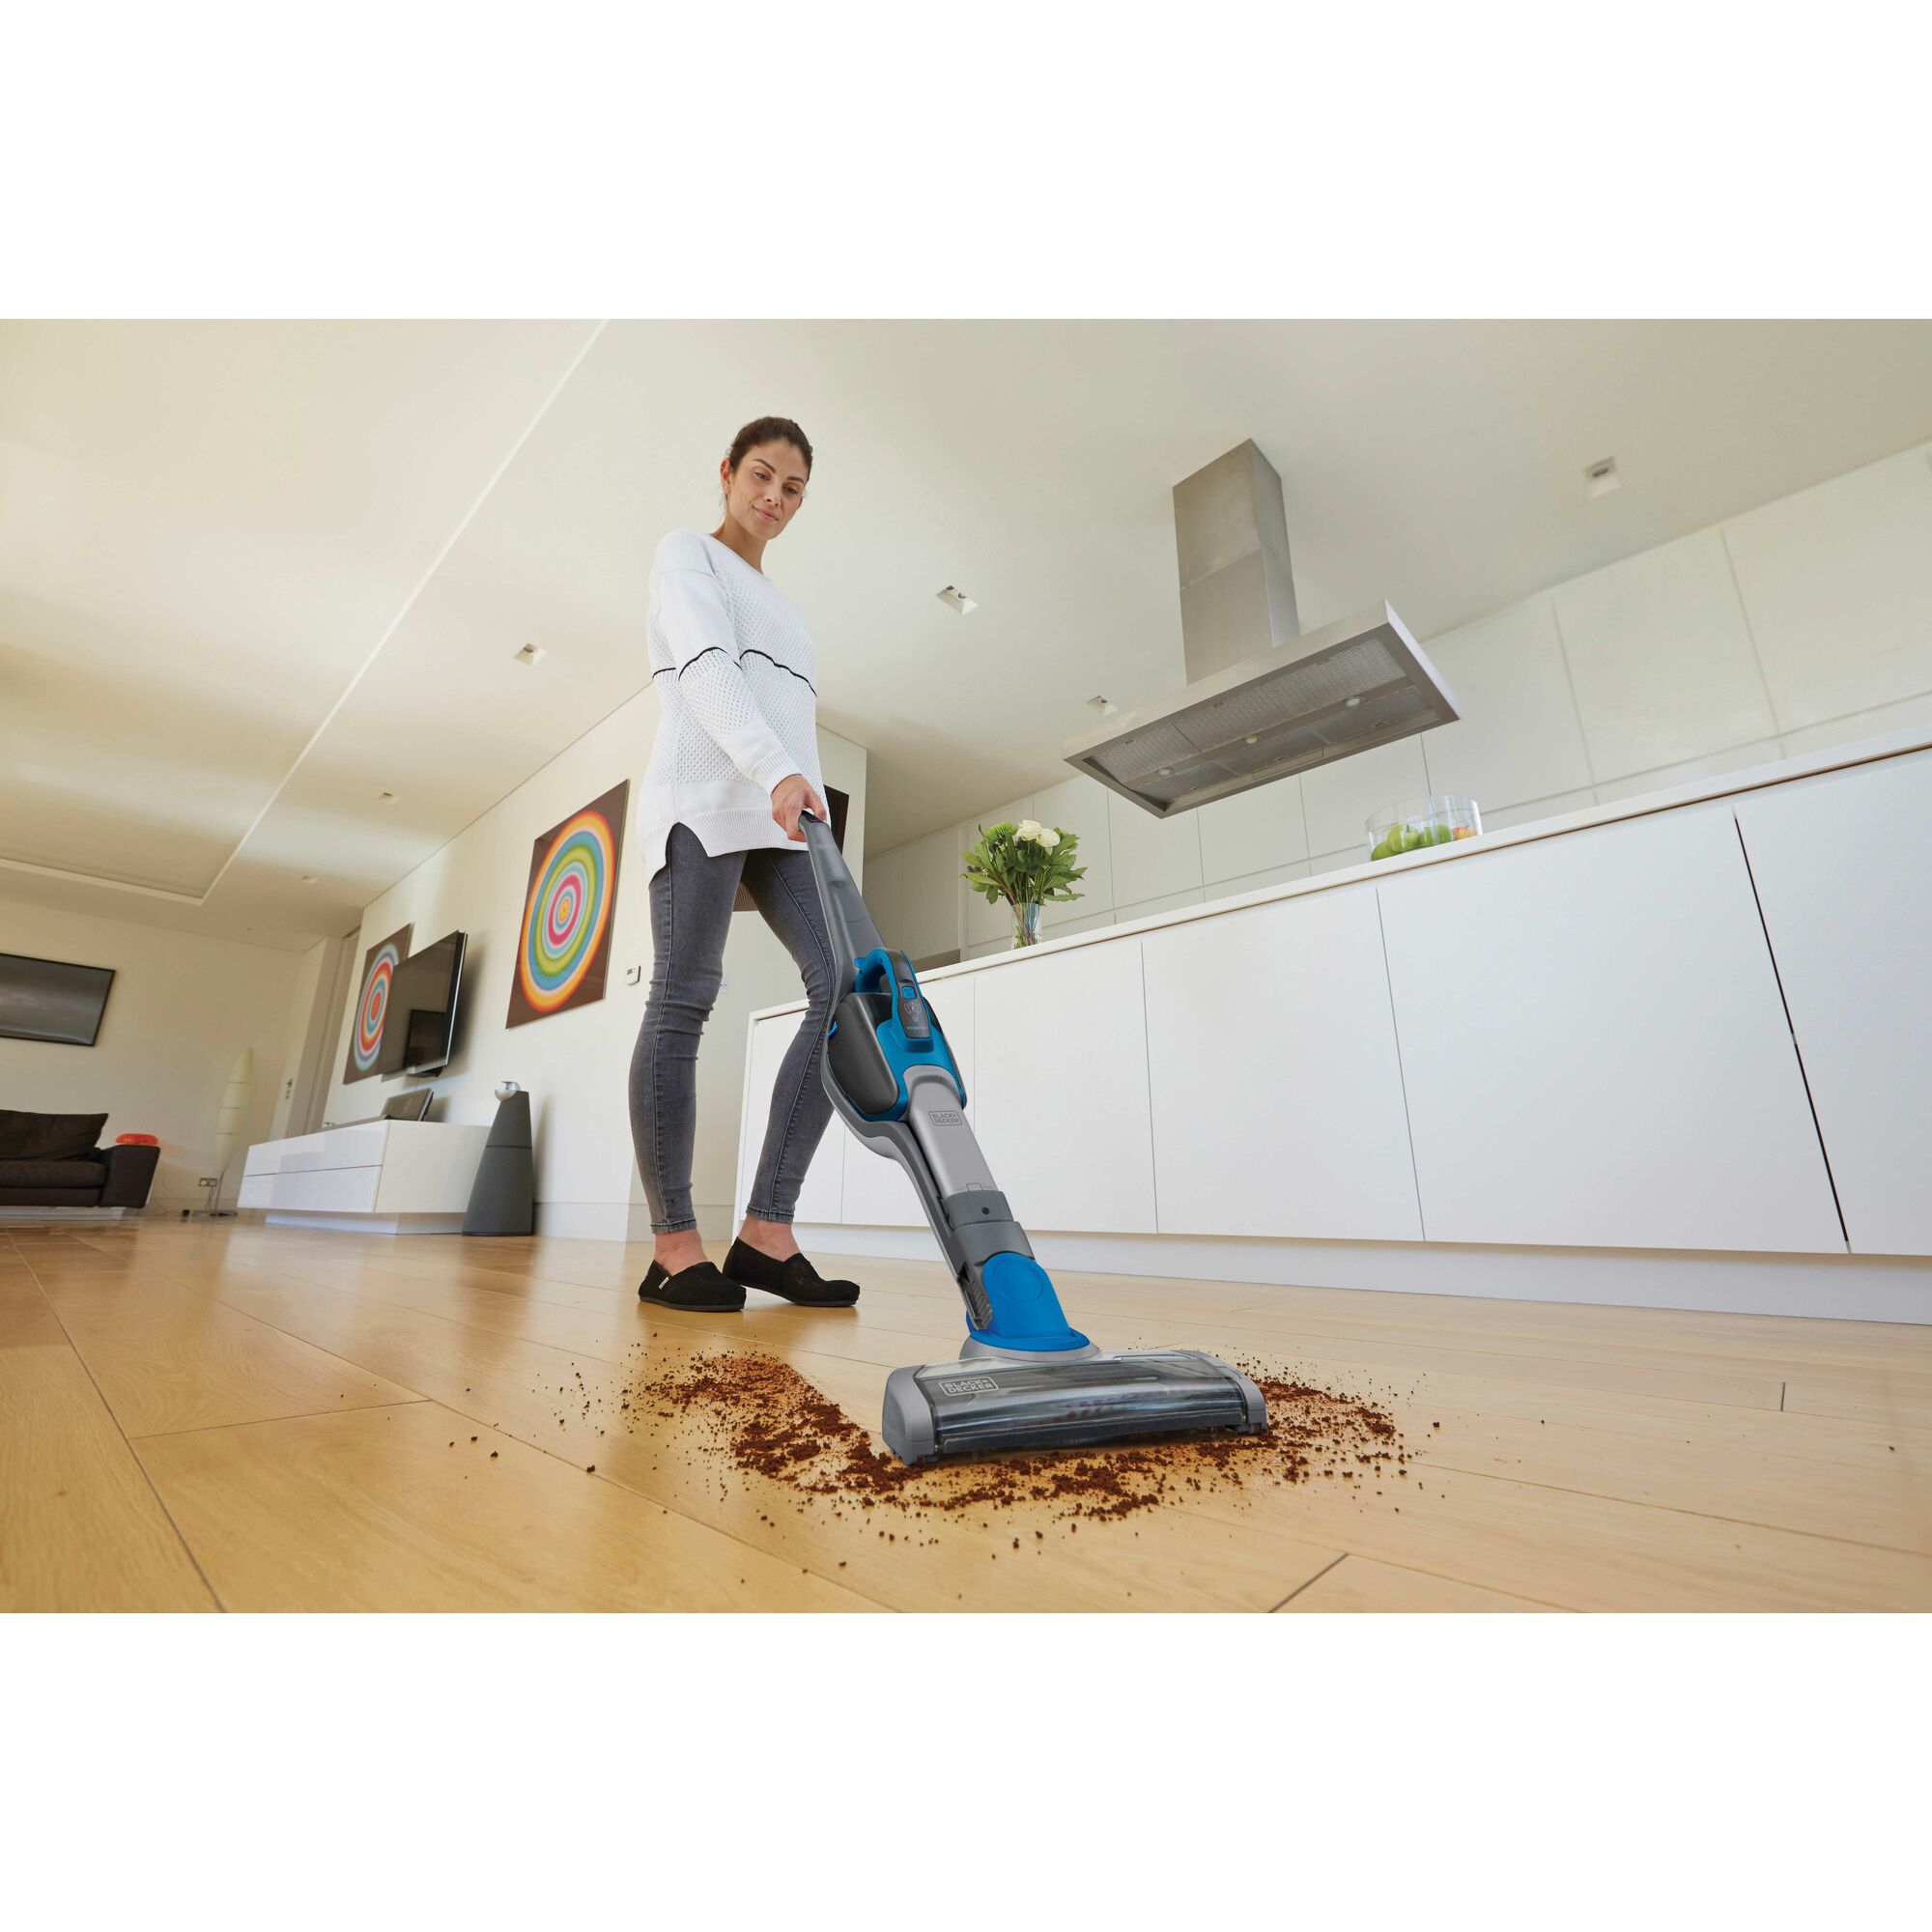 Cordless Lithium 2 in 1 Stick Vacuum being used for cleaning dirt on floor.